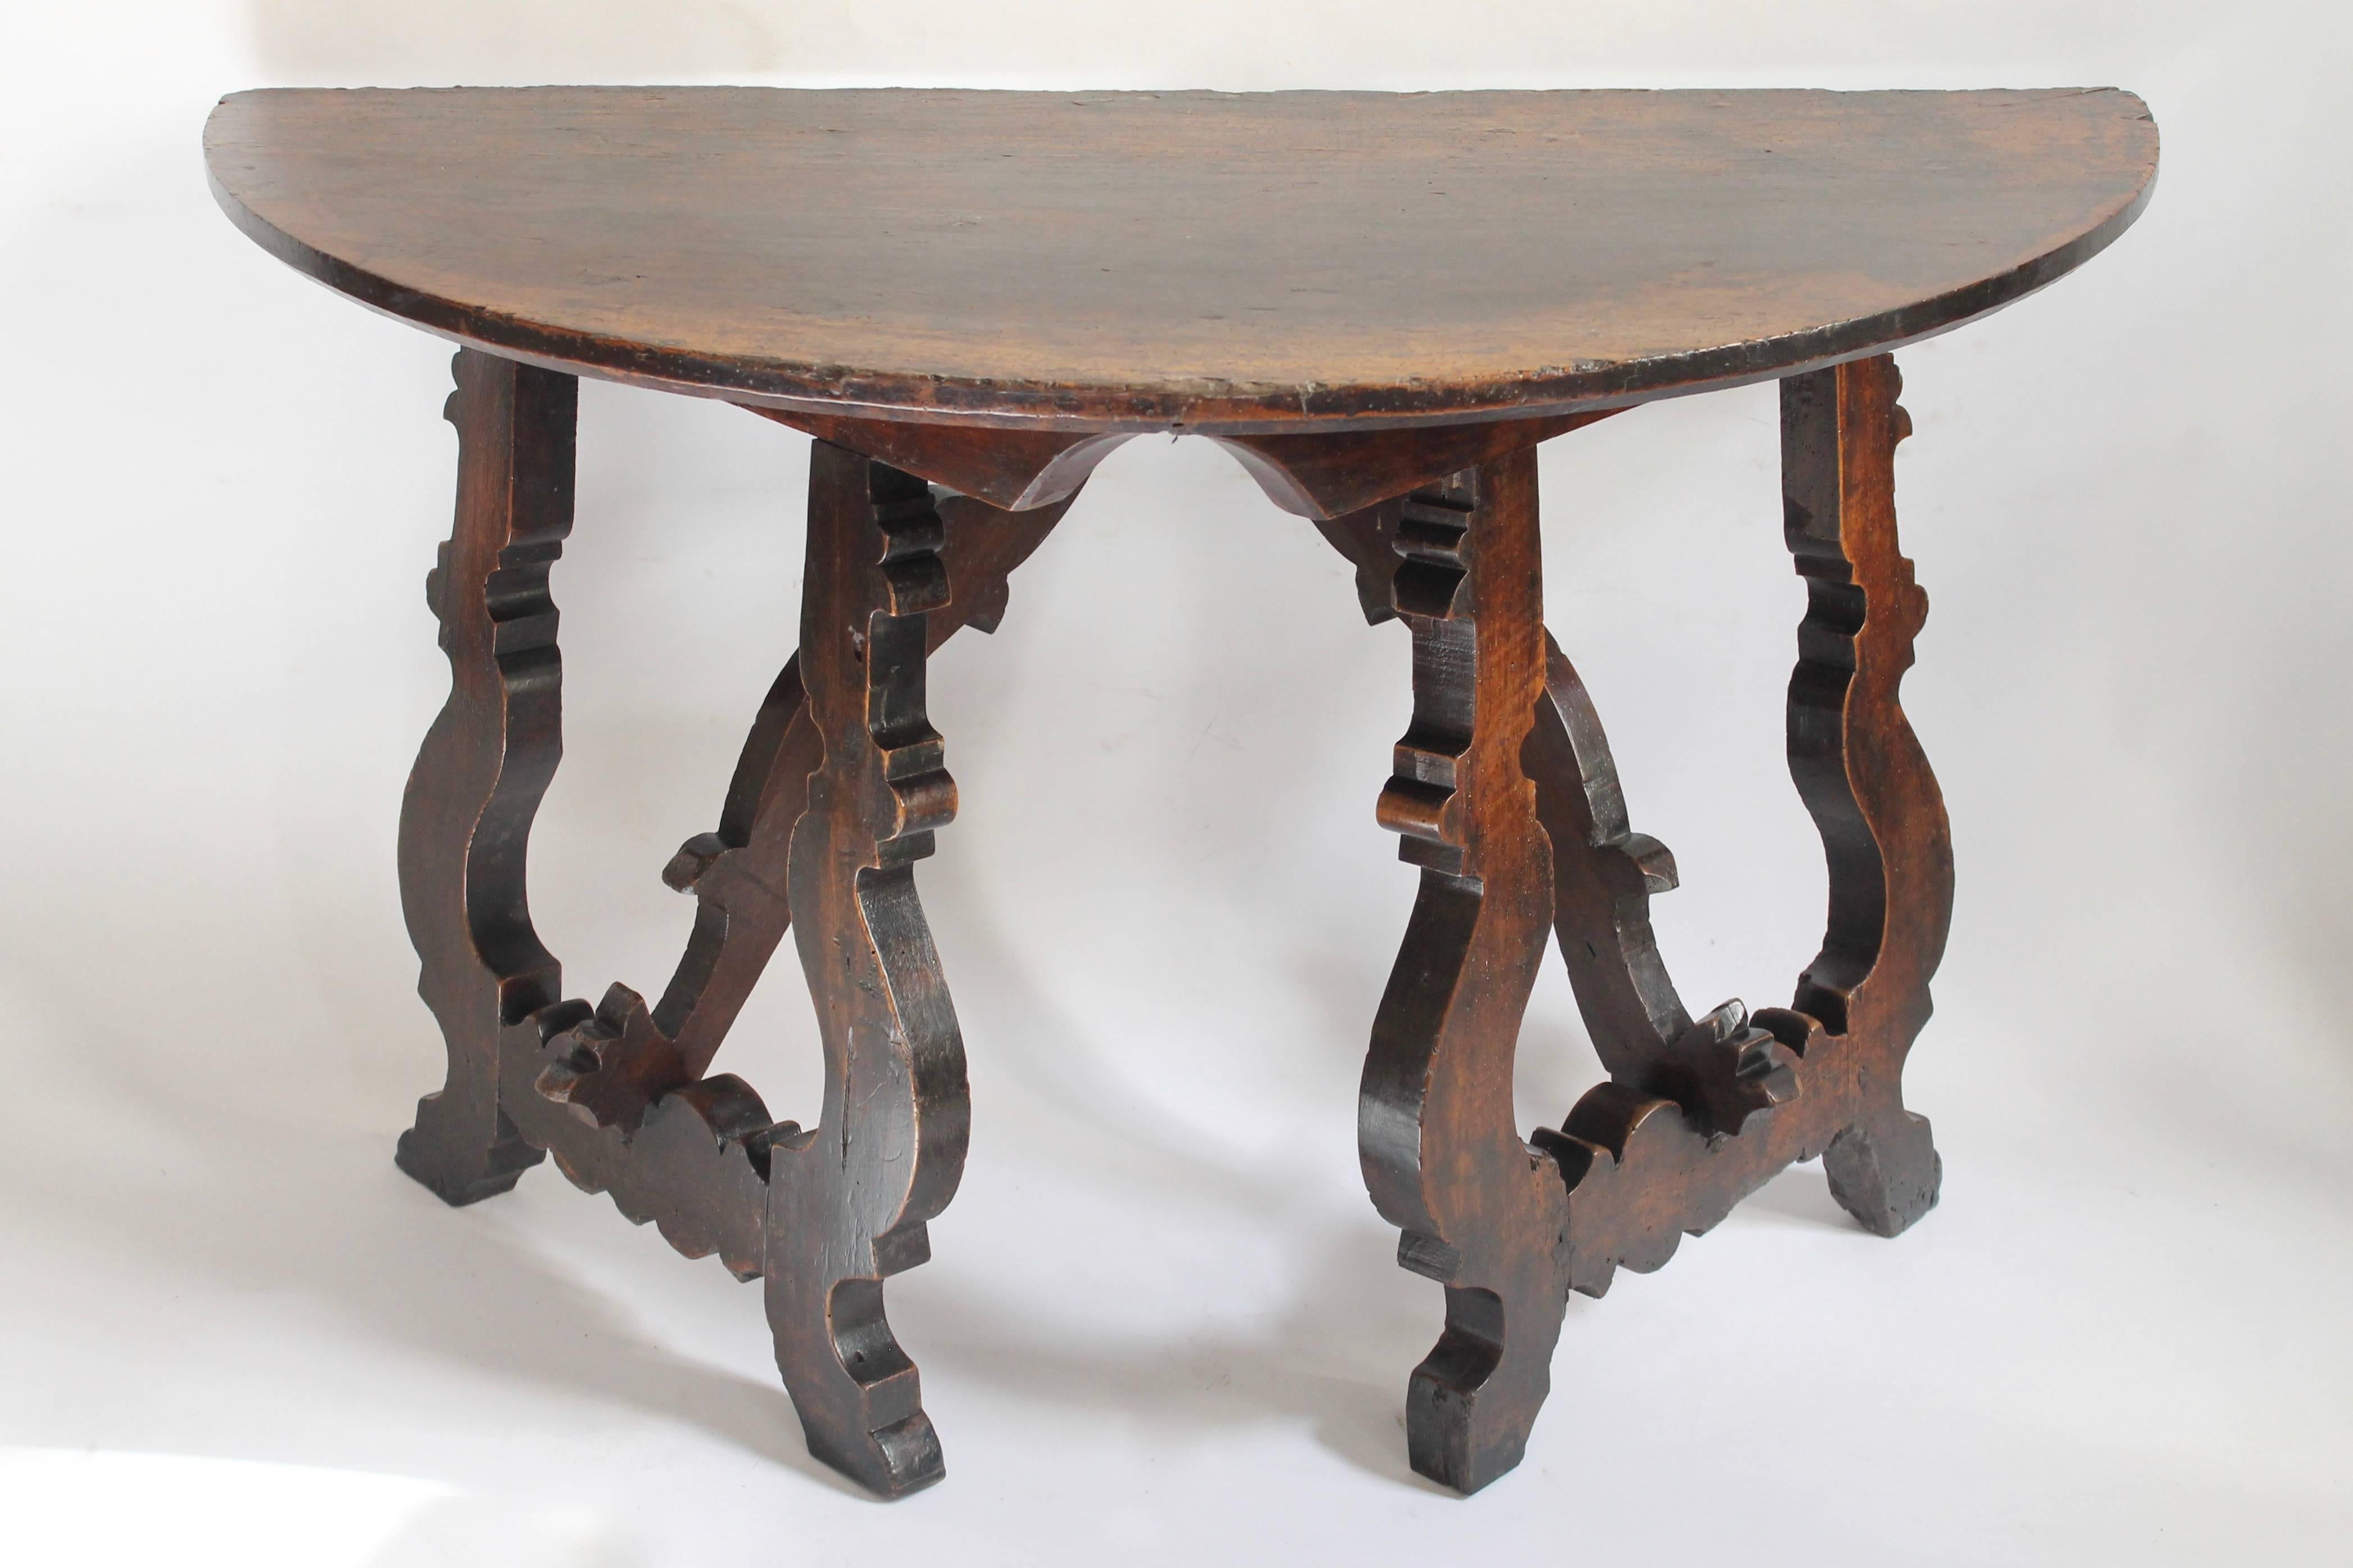 A pair of 17th century Tuscan console tables in solid walnut
Beautiful original deep wax patina
Very well restored and stabile
Under pressure impregnate against wood worm.